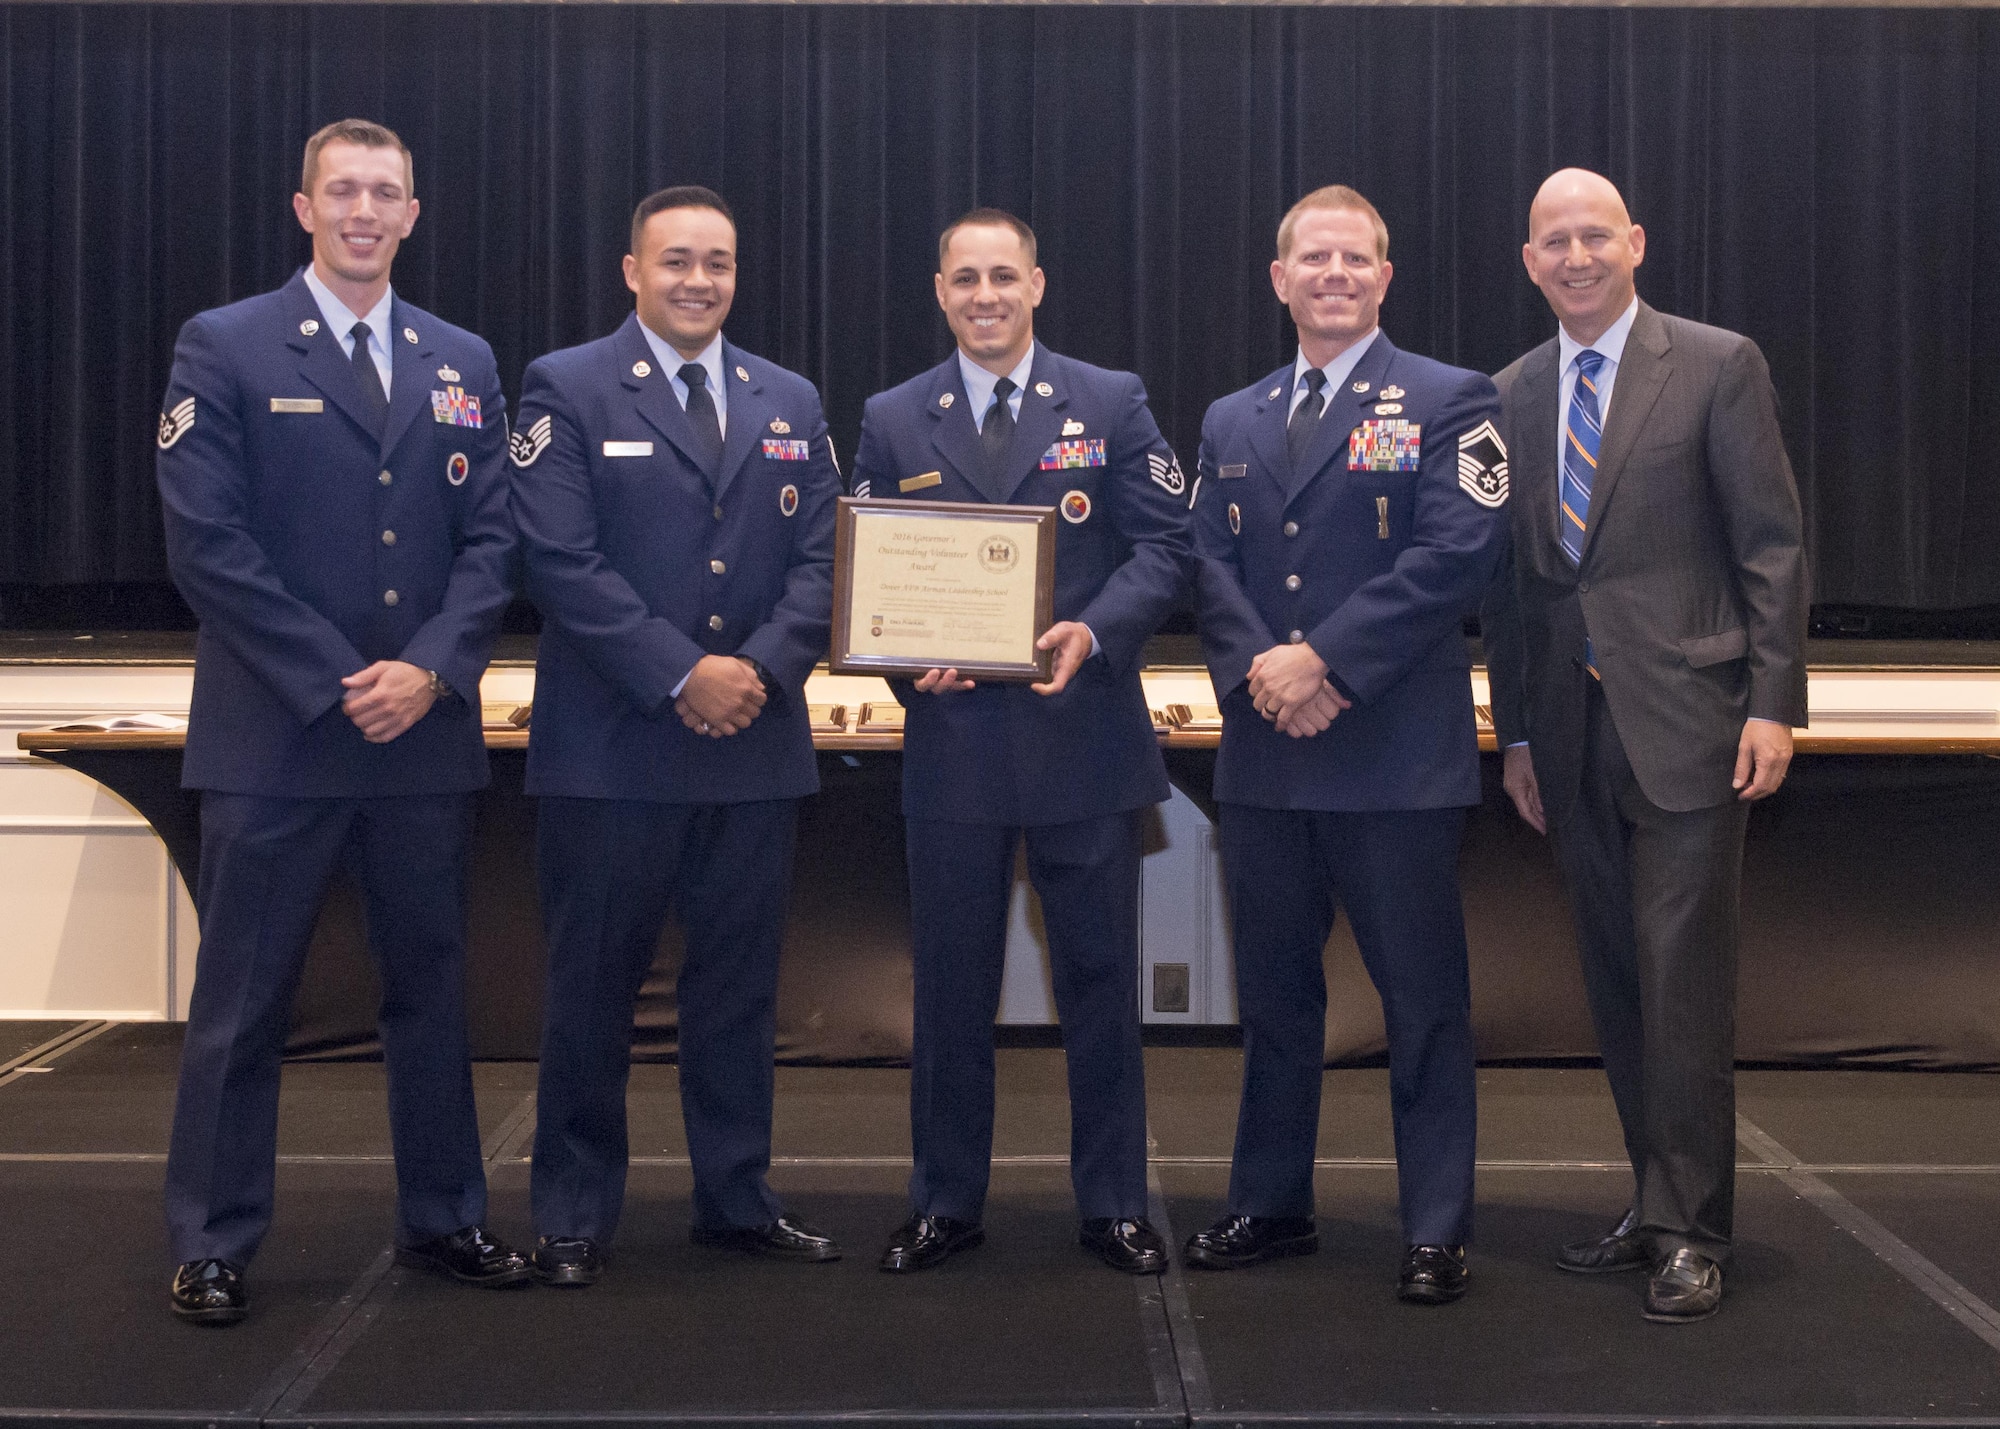 From left to right, Staff Sgts. Brian Lecates, Robert Andrews and Chad Hardesty, 436th Force Support Squadron Airman Leadership School cadre, Senior Master Sgt. Jason Barnshaw, 436th FSS ALS commandant, receive the 2016 Governor’s Outstanding Volunteer Service Award from Gov. Jack Markell during a reception and dinner at Dover Downs Hotel Oct. 9, 2016. In 2015, the cadre motivated and led more than 215 people, providing more than 1,000 volunteer hours in the local community. Their service saved an estimated $10,000 in contracting and other fees. (Courtesy photo)